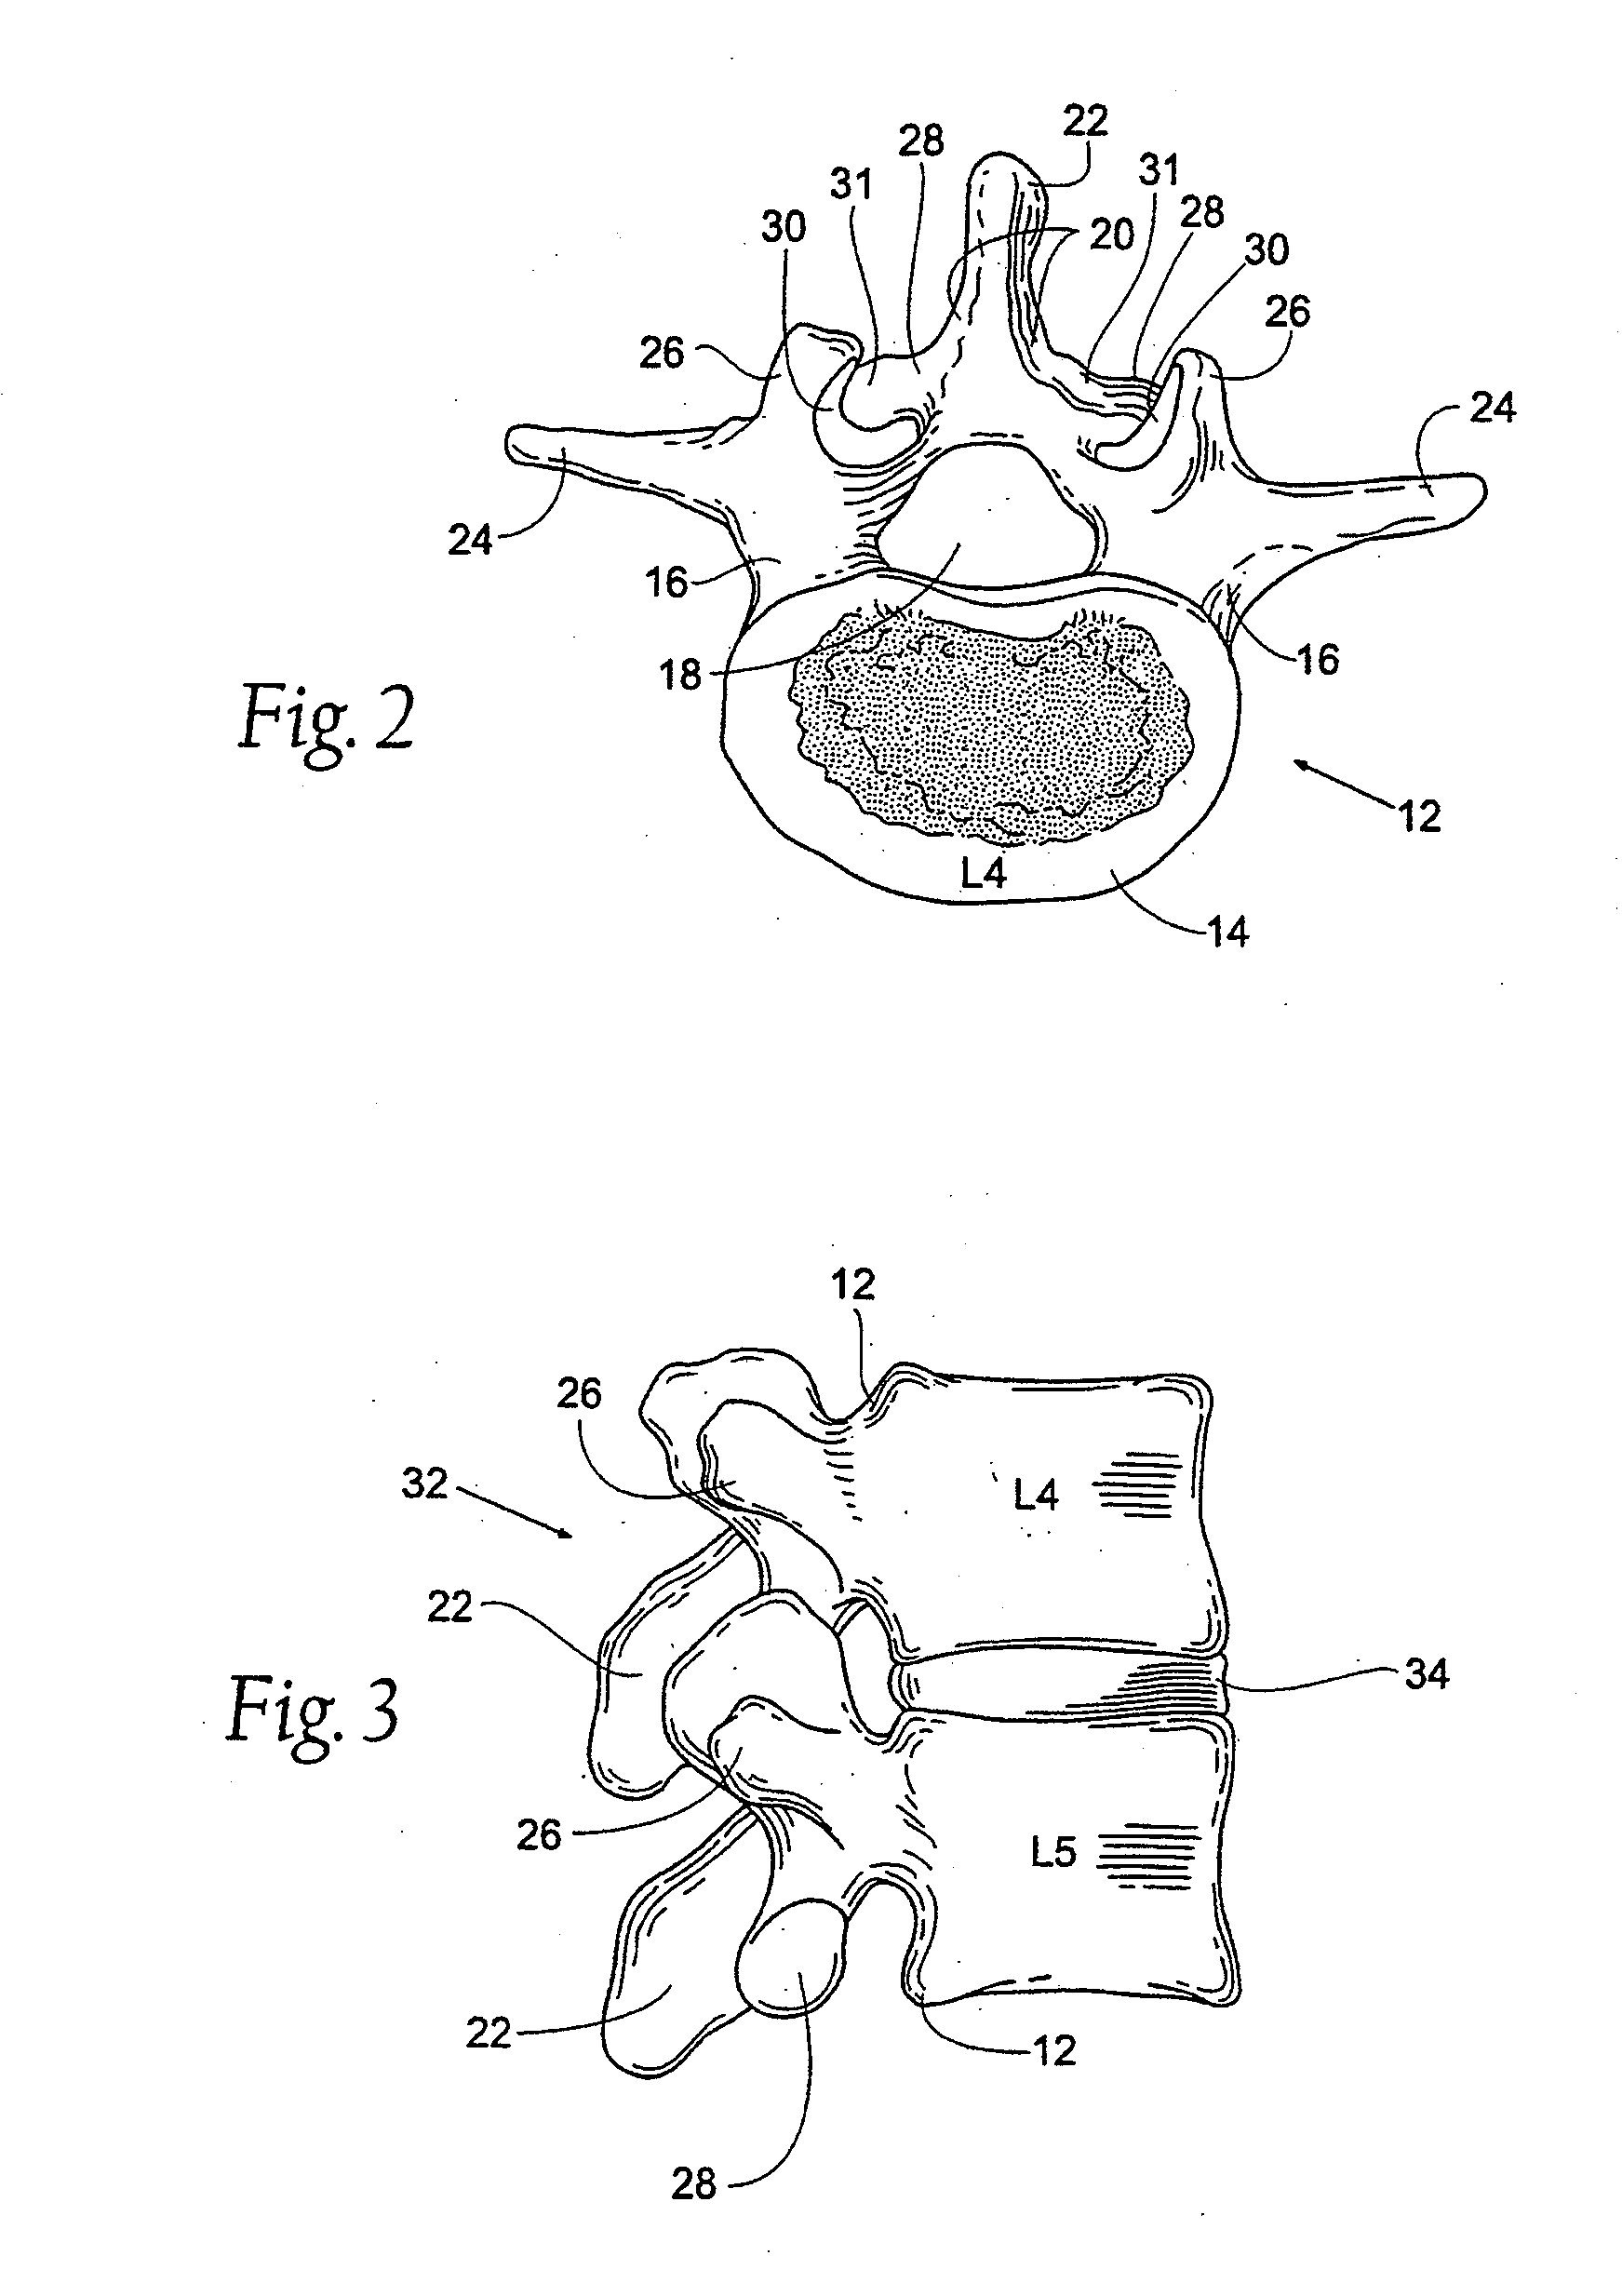 Prostheses systems and methods for replacement of natural facet joints with artificial facet joint surfaces